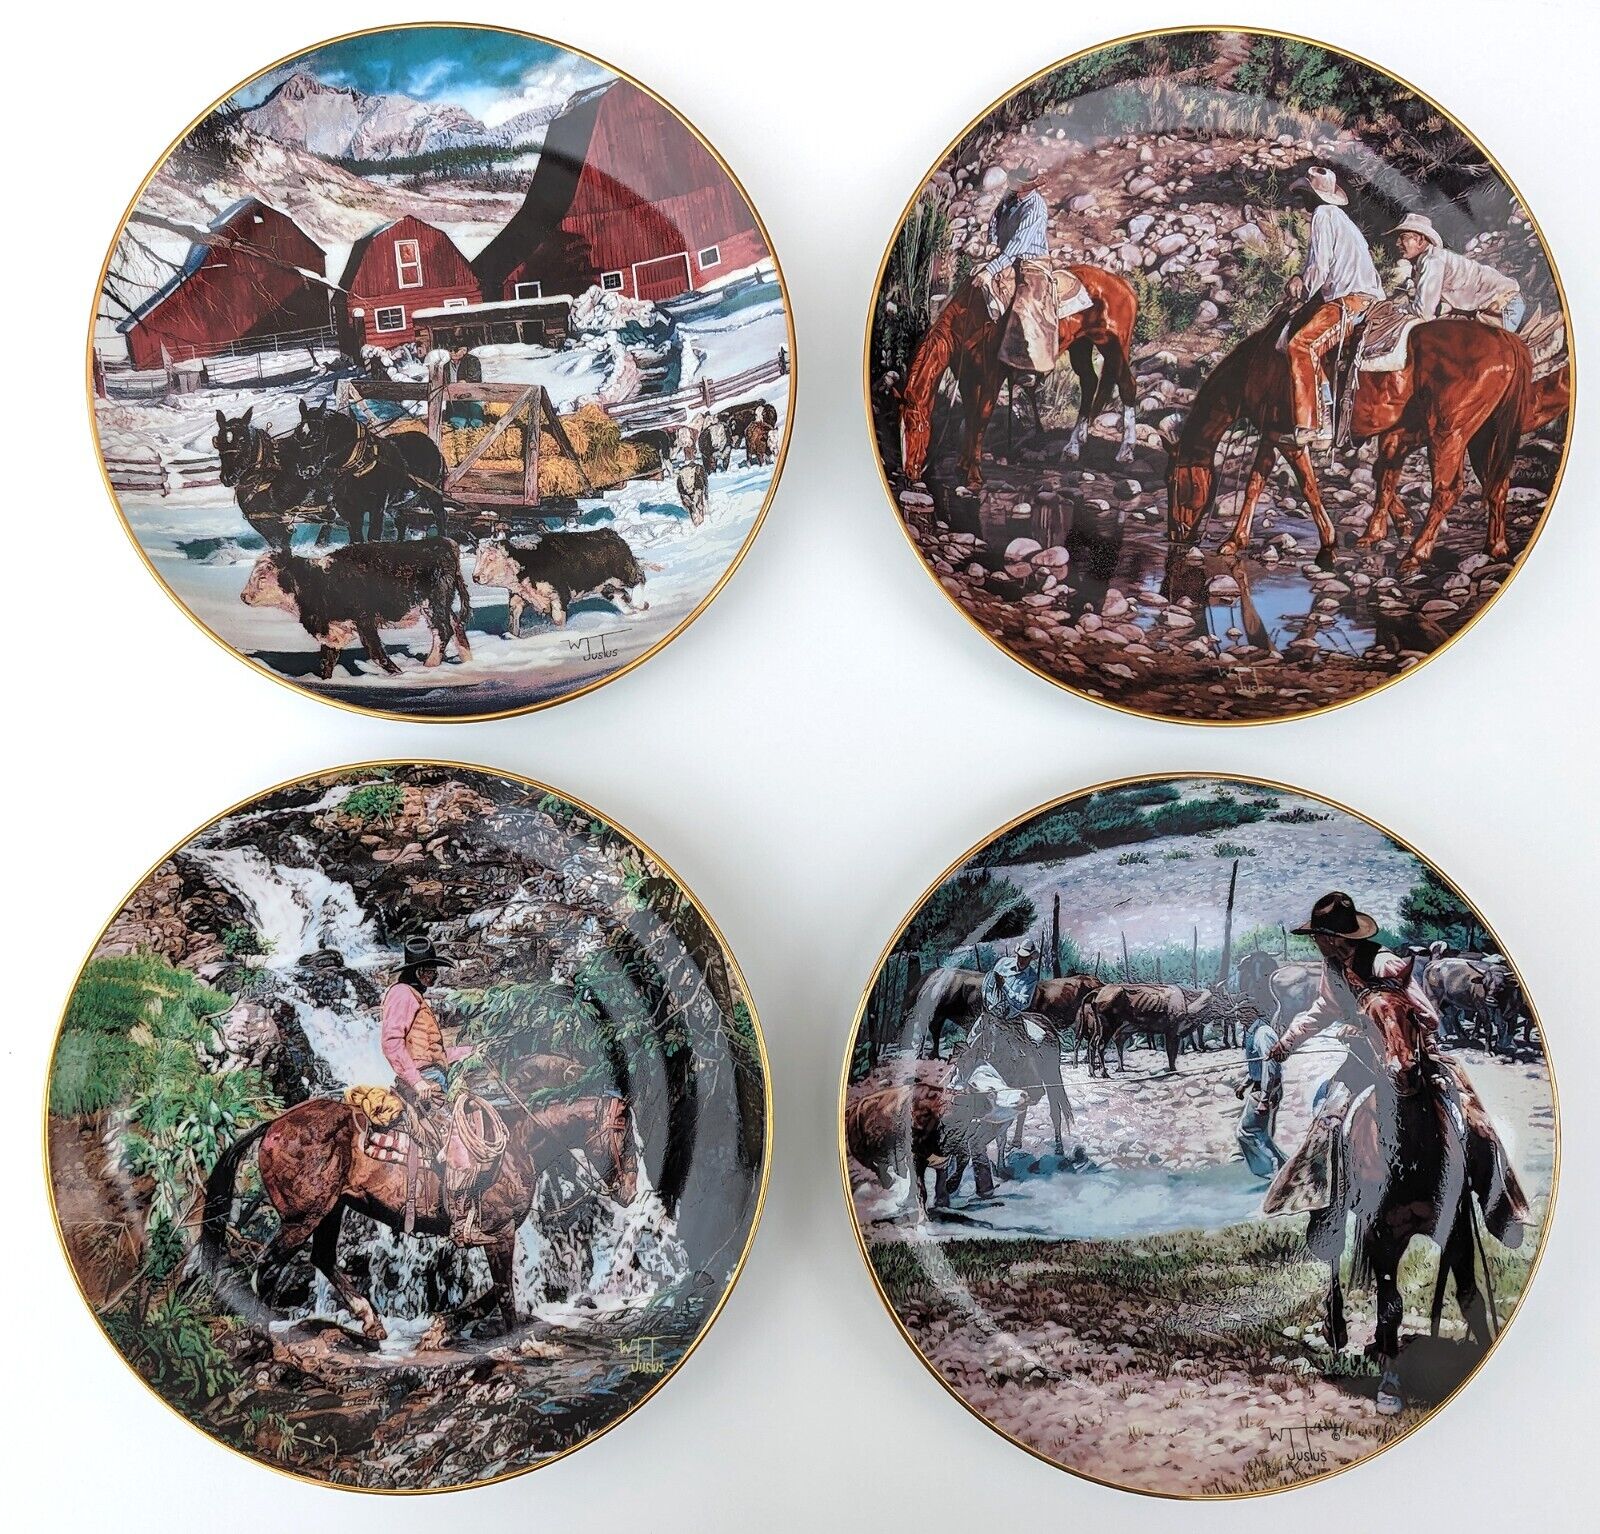 Set of 4 Life On The Range Collector Plates Danbury Mint by Wayne Justus